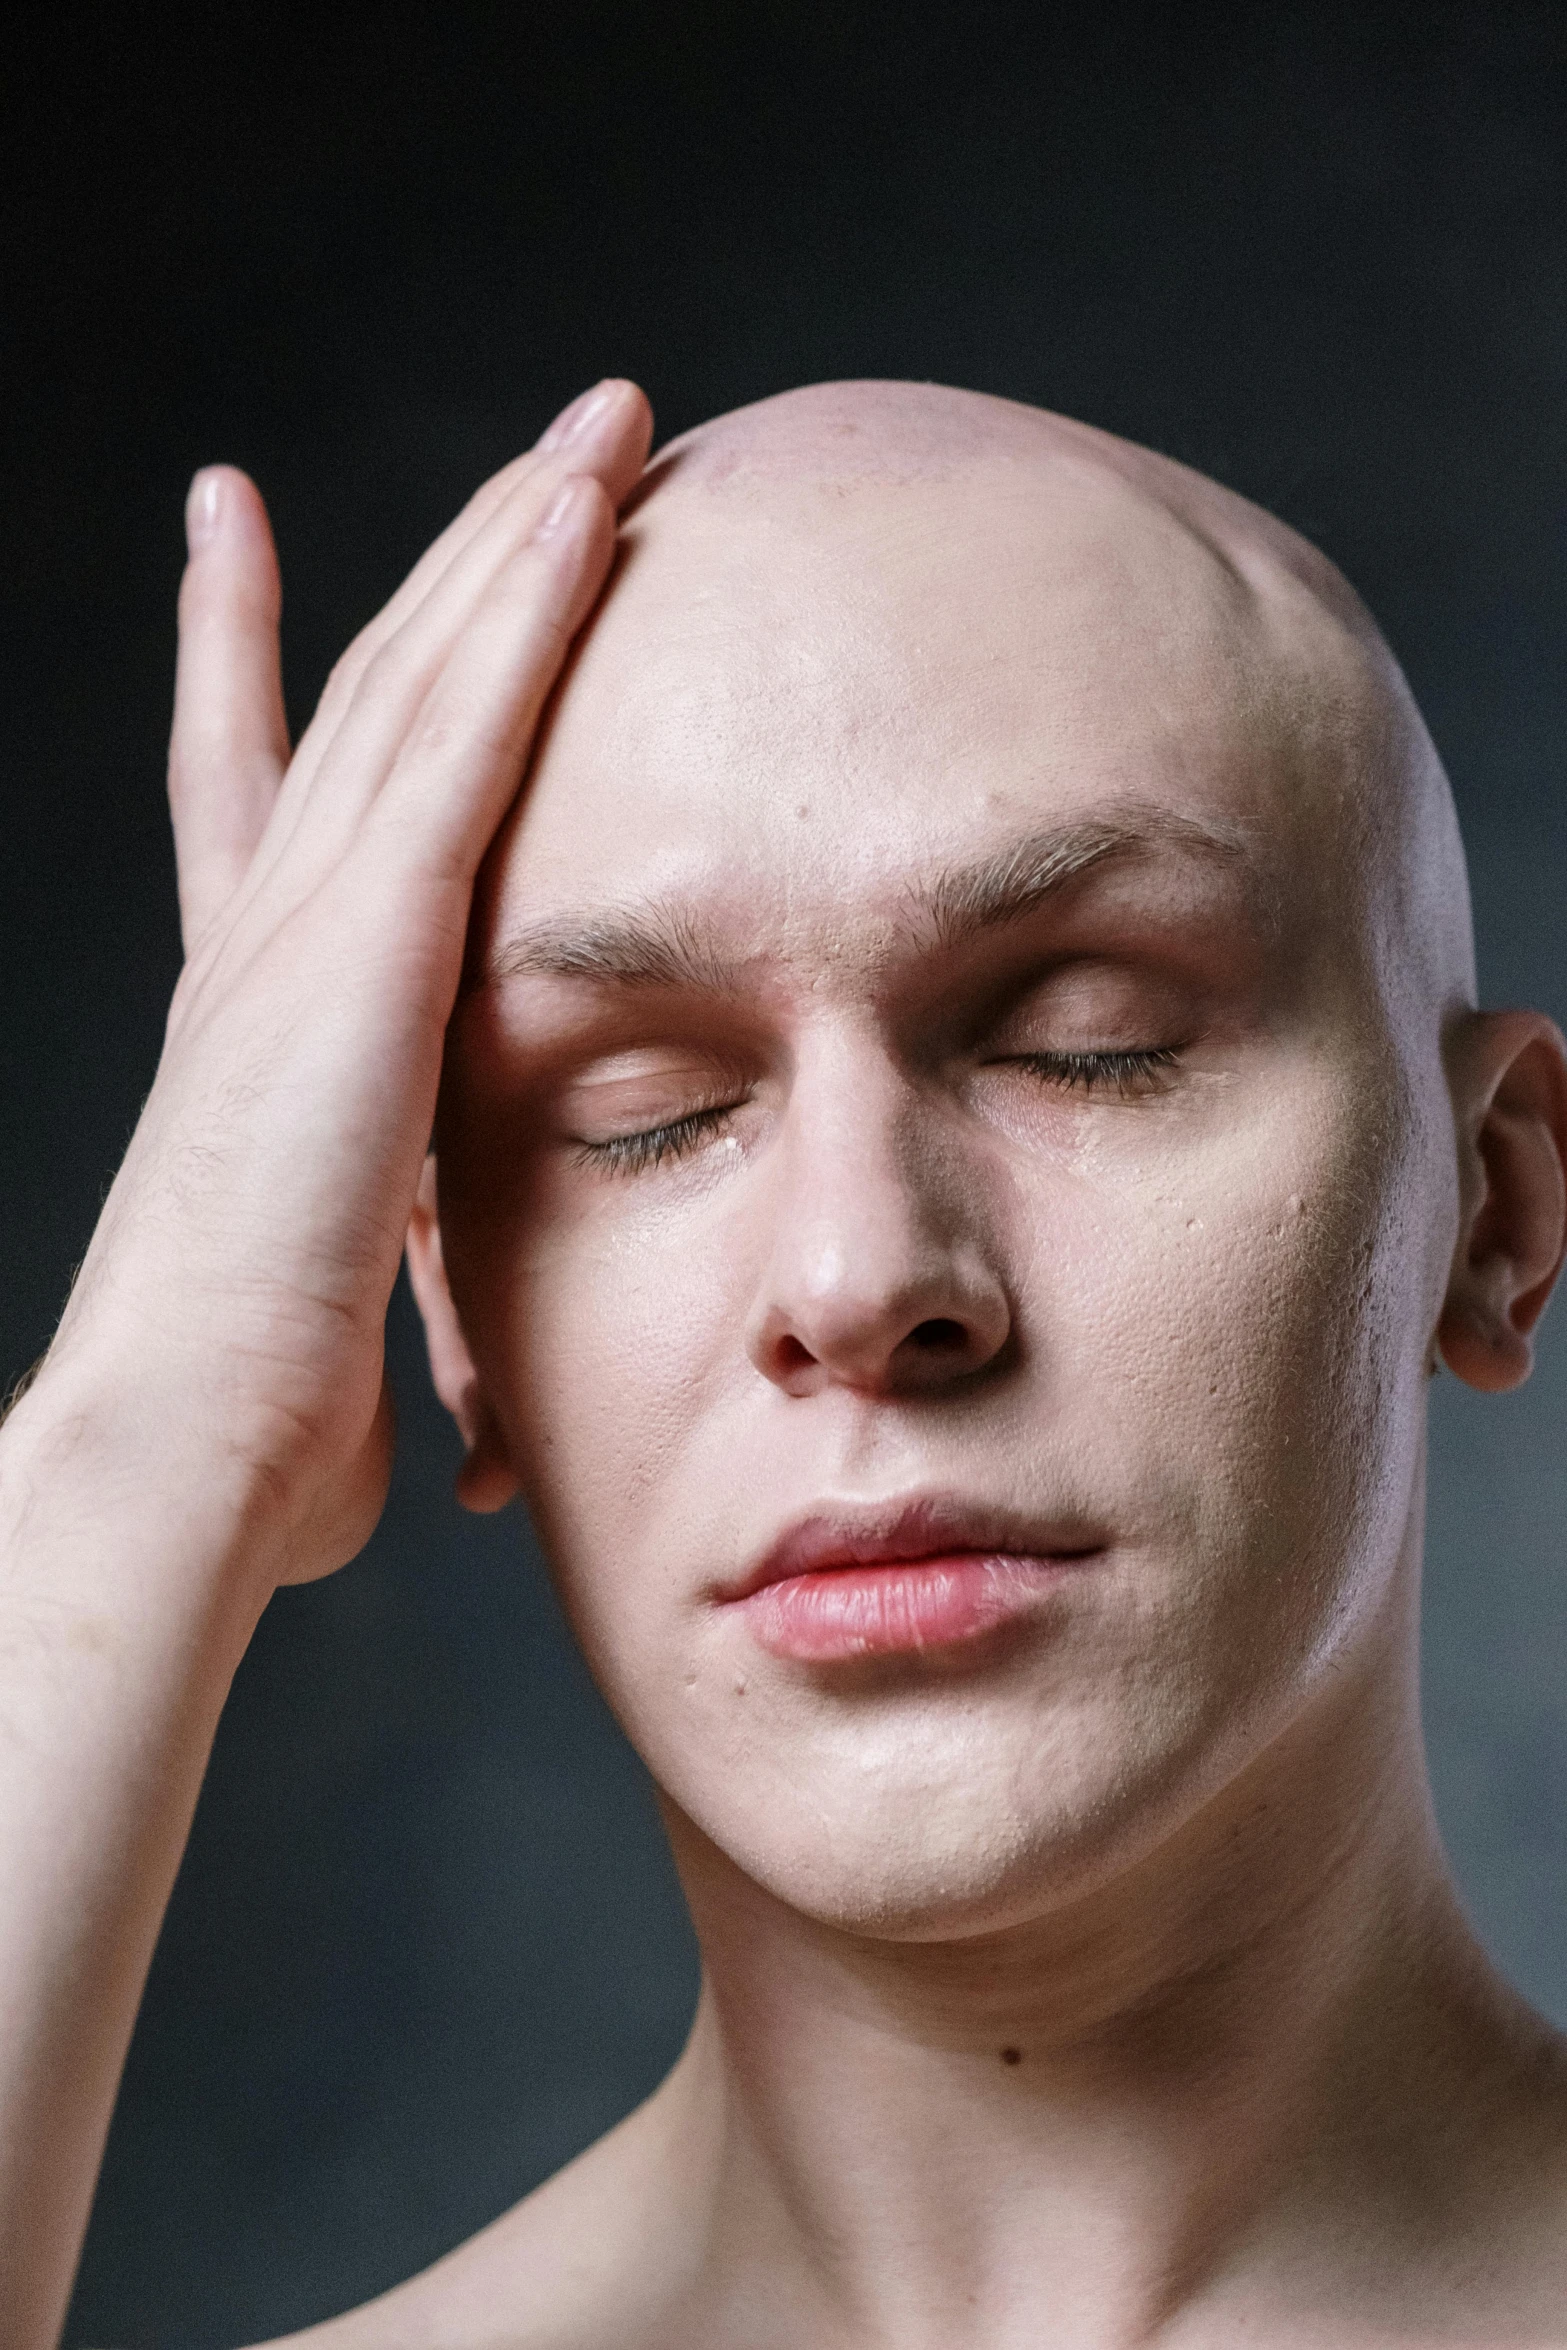 a man with a bald head is holding his hands to his head, an album cover, inspired by Odd Nerdrum, shutterstock, albino skin, sleepy fashion model face, linus from linustechtips, headshot profile picture